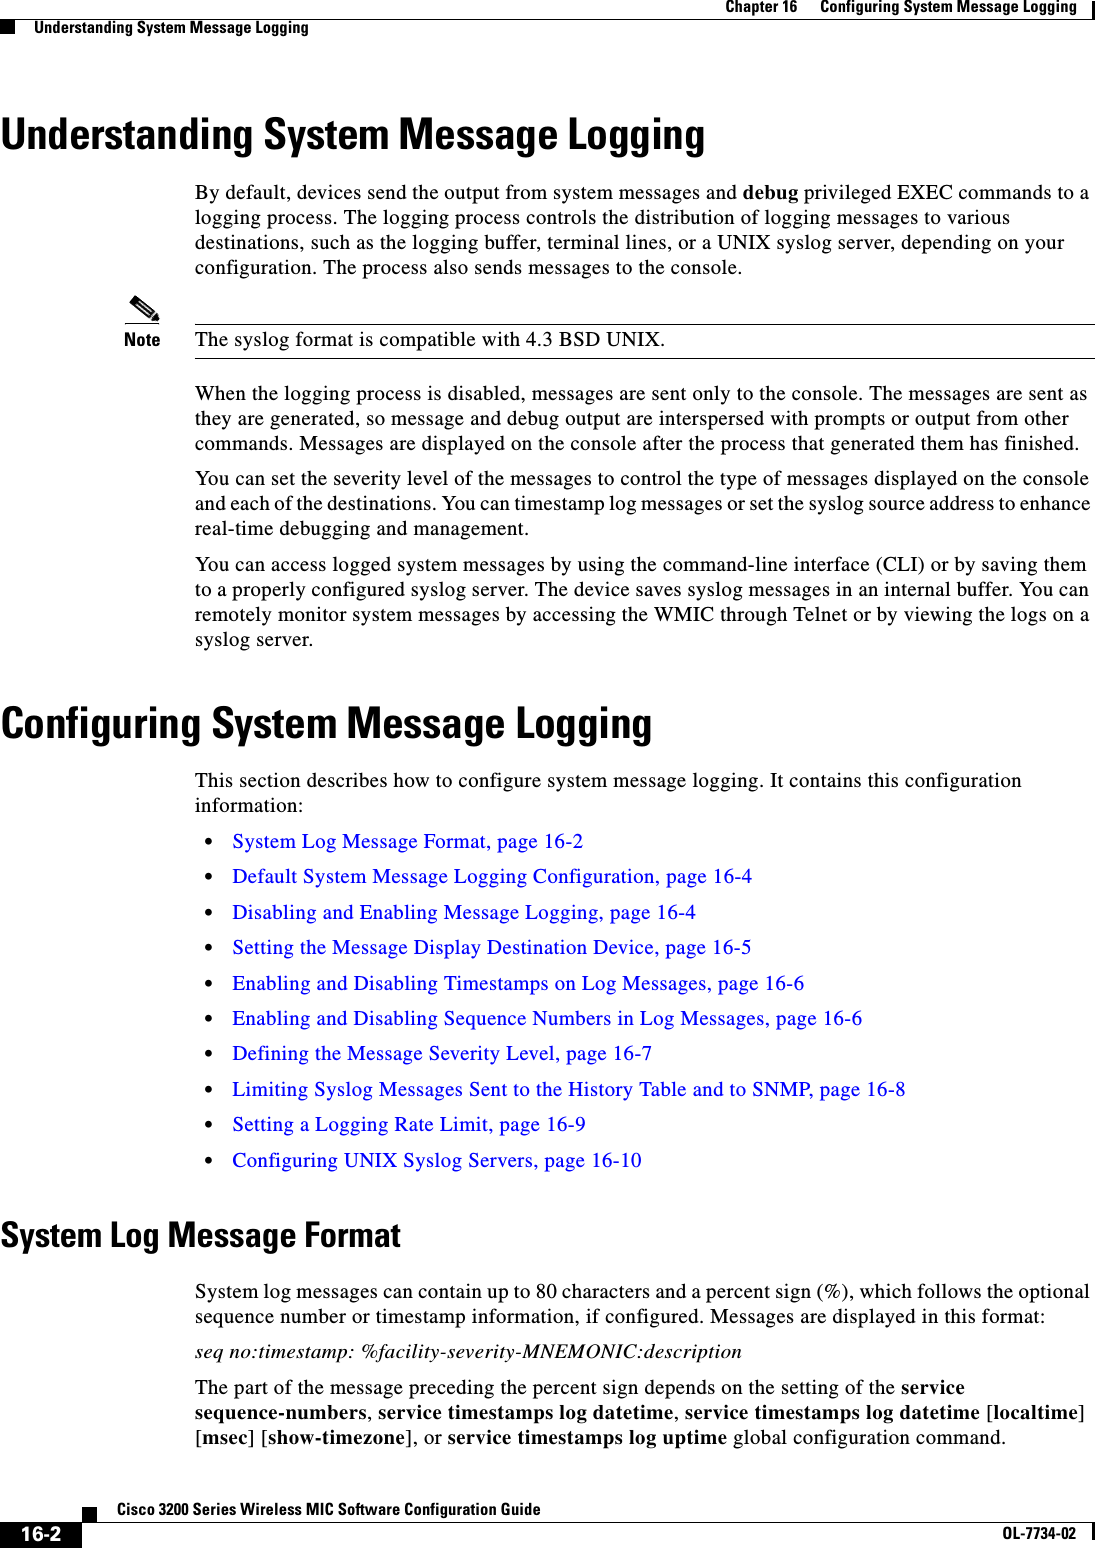 16-2Cisco 3200 Series Wireless MIC Software Configuration GuideOL-7734-02Chapter 16      Configuring System Message LoggingUnderstanding System Message LoggingUnderstanding System Message LoggingBy default, devices send the output from system messages and debug privileged EXEC commands to a logging process. The logging process controls the distribution of logging messages to various destinations, such as the logging buffer, terminal lines, or a UNIX syslog server, depending on your configuration. The process also sends messages to the console. Note The syslog format is compatible with 4.3 BSD UNIX.When the logging process is disabled, messages are sent only to the console. The messages are sent as they are generated, so message and debug output are interspersed with prompts or output from other commands. Messages are displayed on the console after the process that generated them has finished.You can set the severity level of the messages to control the type of messages displayed on the console and each of the destinations. You can timestamp log messages or set the syslog source address to enhance real-time debugging and management.You can access logged system messages by using the command-line interface (CLI) or by saving them to a properly configured syslog server. The device saves syslog messages in an internal buffer. You can remotely monitor system messages by accessing the WMIC through Telnet or by viewing the logs on a syslog server.Configuring System Message LoggingThis section describes how to configure system message logging. It contains this configuration information:•System Log Message Format, page 16-2•Default System Message Logging Configuration, page 16-4•Disabling and Enabling Message Logging, page 16-4•Setting the Message Display Destination Device, page 16-5•Enabling and Disabling Timestamps on Log Messages, page 16-6•Enabling and Disabling Sequence Numbers in Log Messages, page 16-6•Defining the Message Severity Level, page 16-7•Limiting Syslog Messages Sent to the History Table and to SNMP, page 16-8•Setting a Logging Rate Limit, page 16-9•Configuring UNIX Syslog Servers, page 16-10System Log Message FormatSystem log messages can contain up to 80 characters and a percent sign (%), which follows the optional sequence number or timestamp information, if configured. Messages are displayed in this format:seq no:timestamp: %facility-severity-MNEMONIC:descriptionThe part of the message preceding the percent sign depends on the setting of the service sequence-numbers,service timestamps log datetime,service timestamps log datetime [localtime][msec] [show-timezone], or service timestamps log uptime global configuration command.